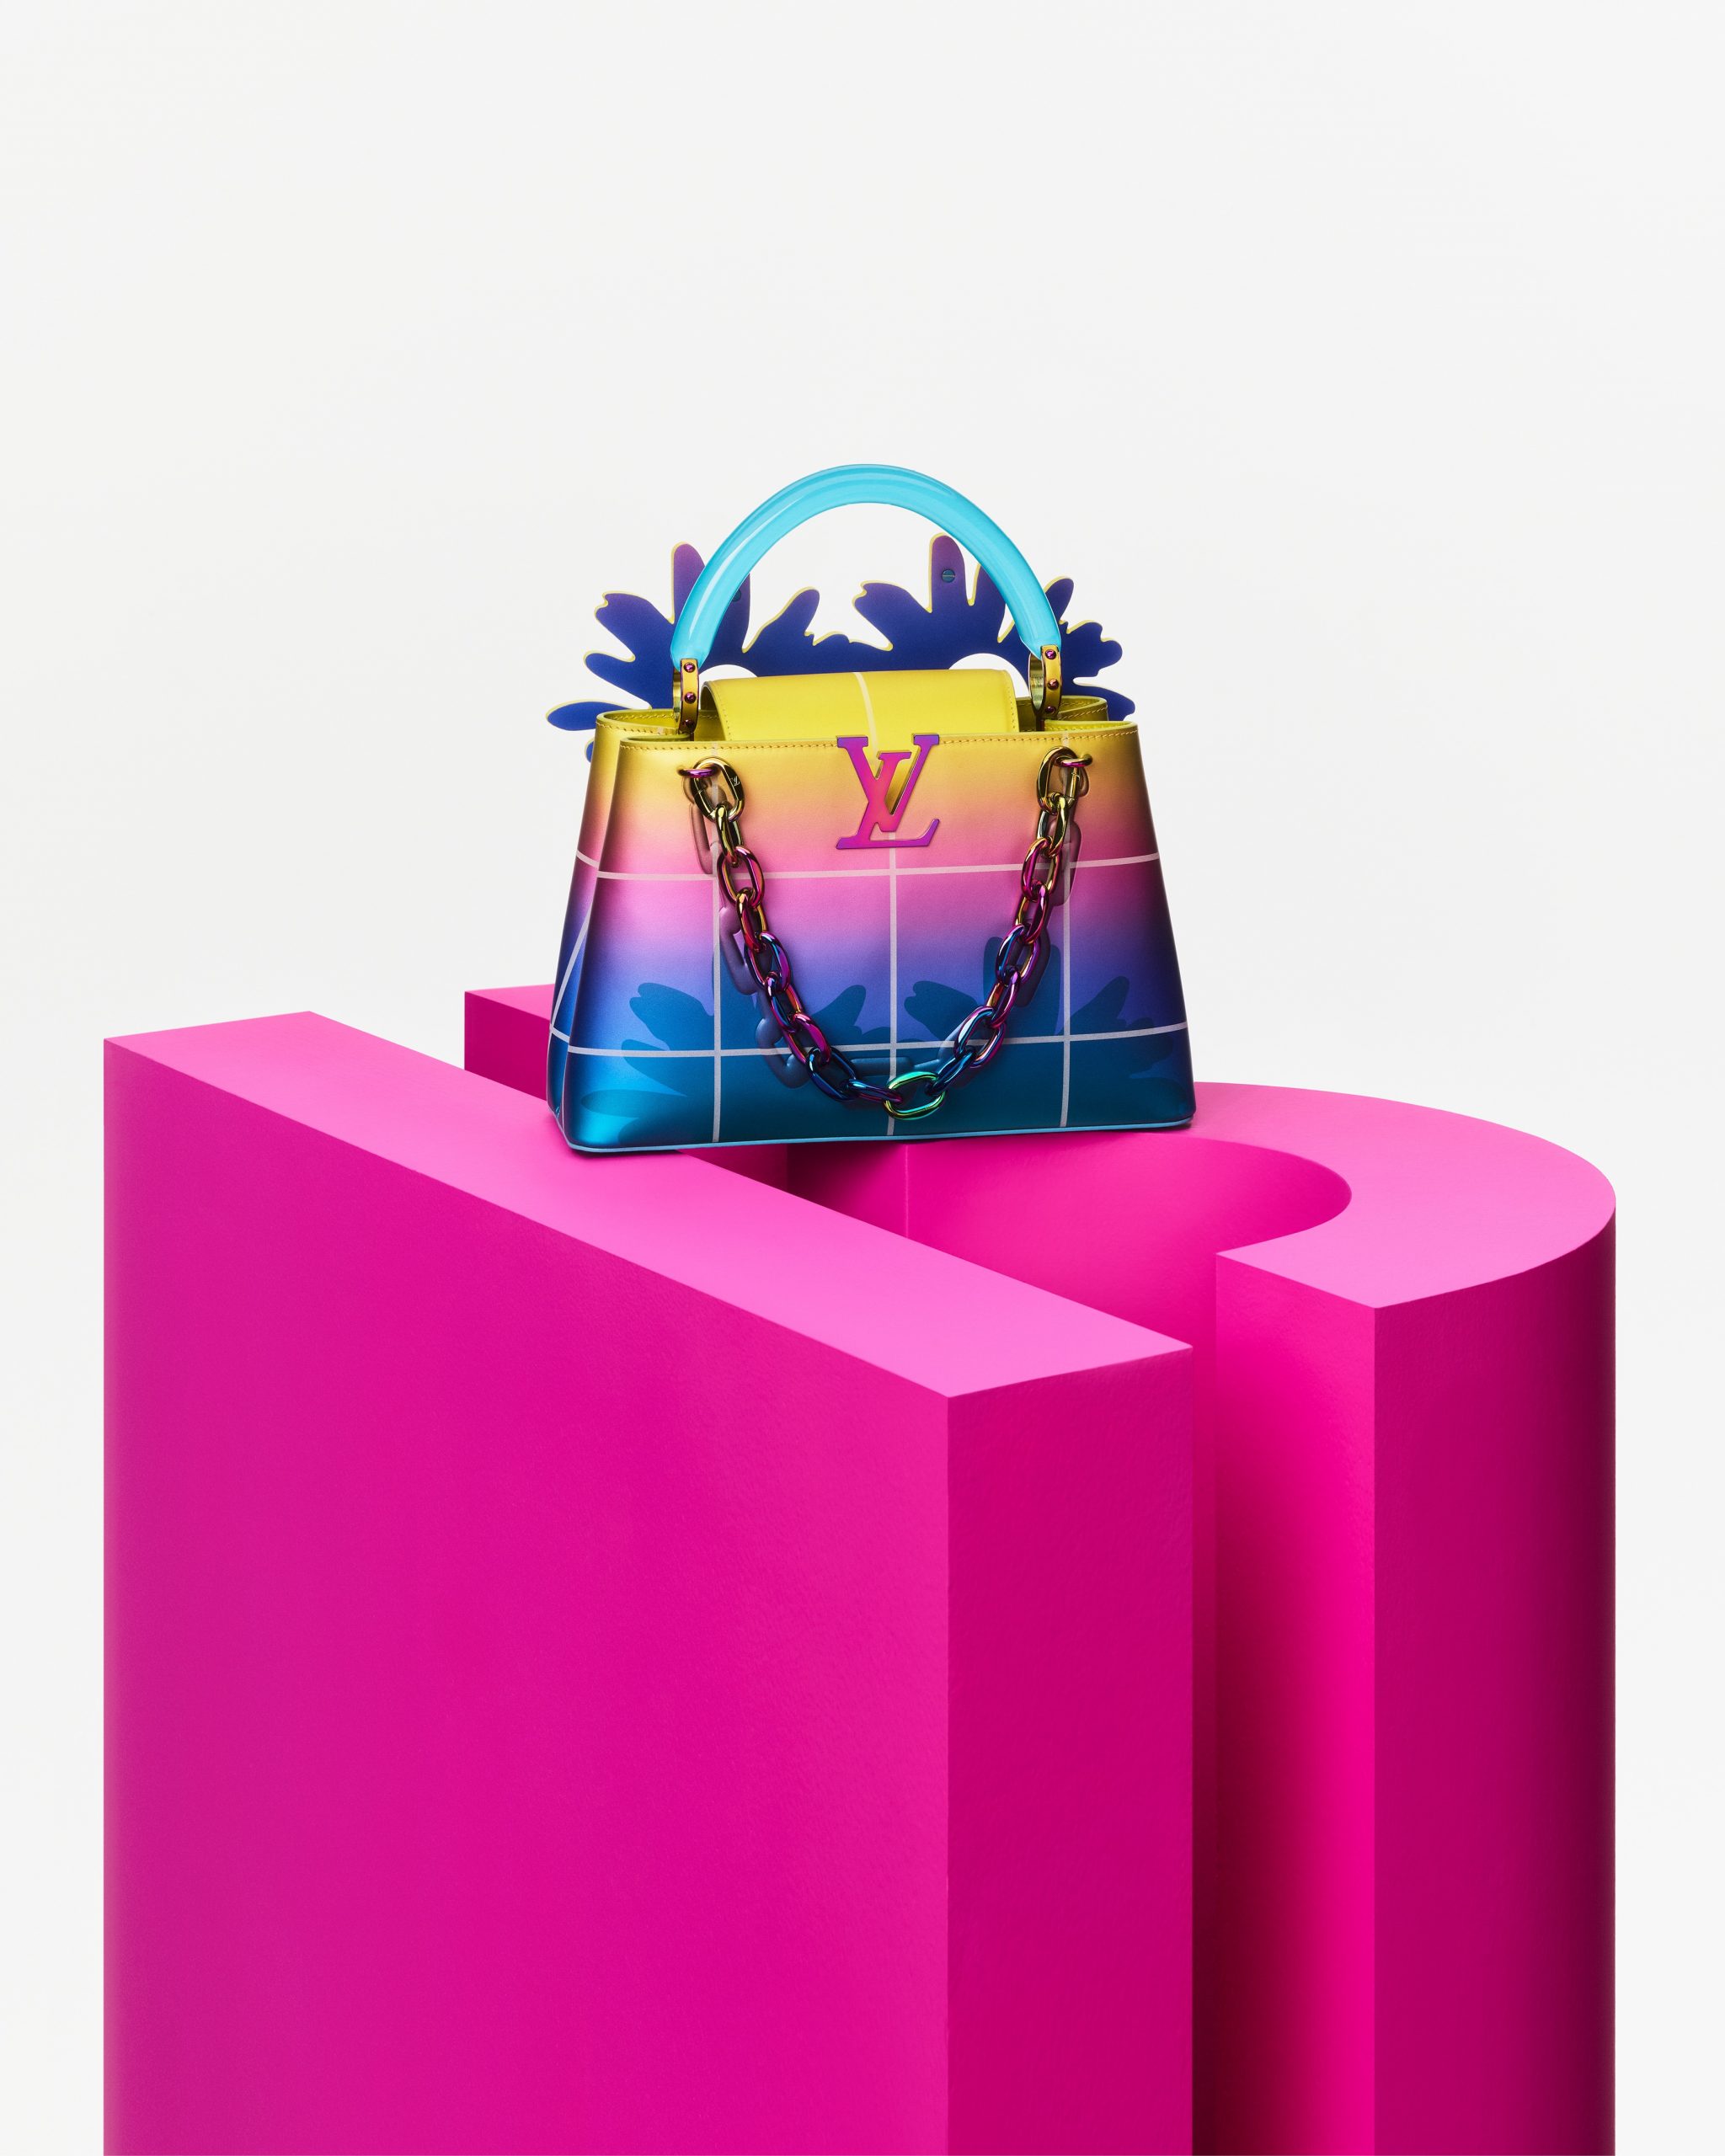 Louis Vuitton Collaborates With Six Artists on Its Artycapucines